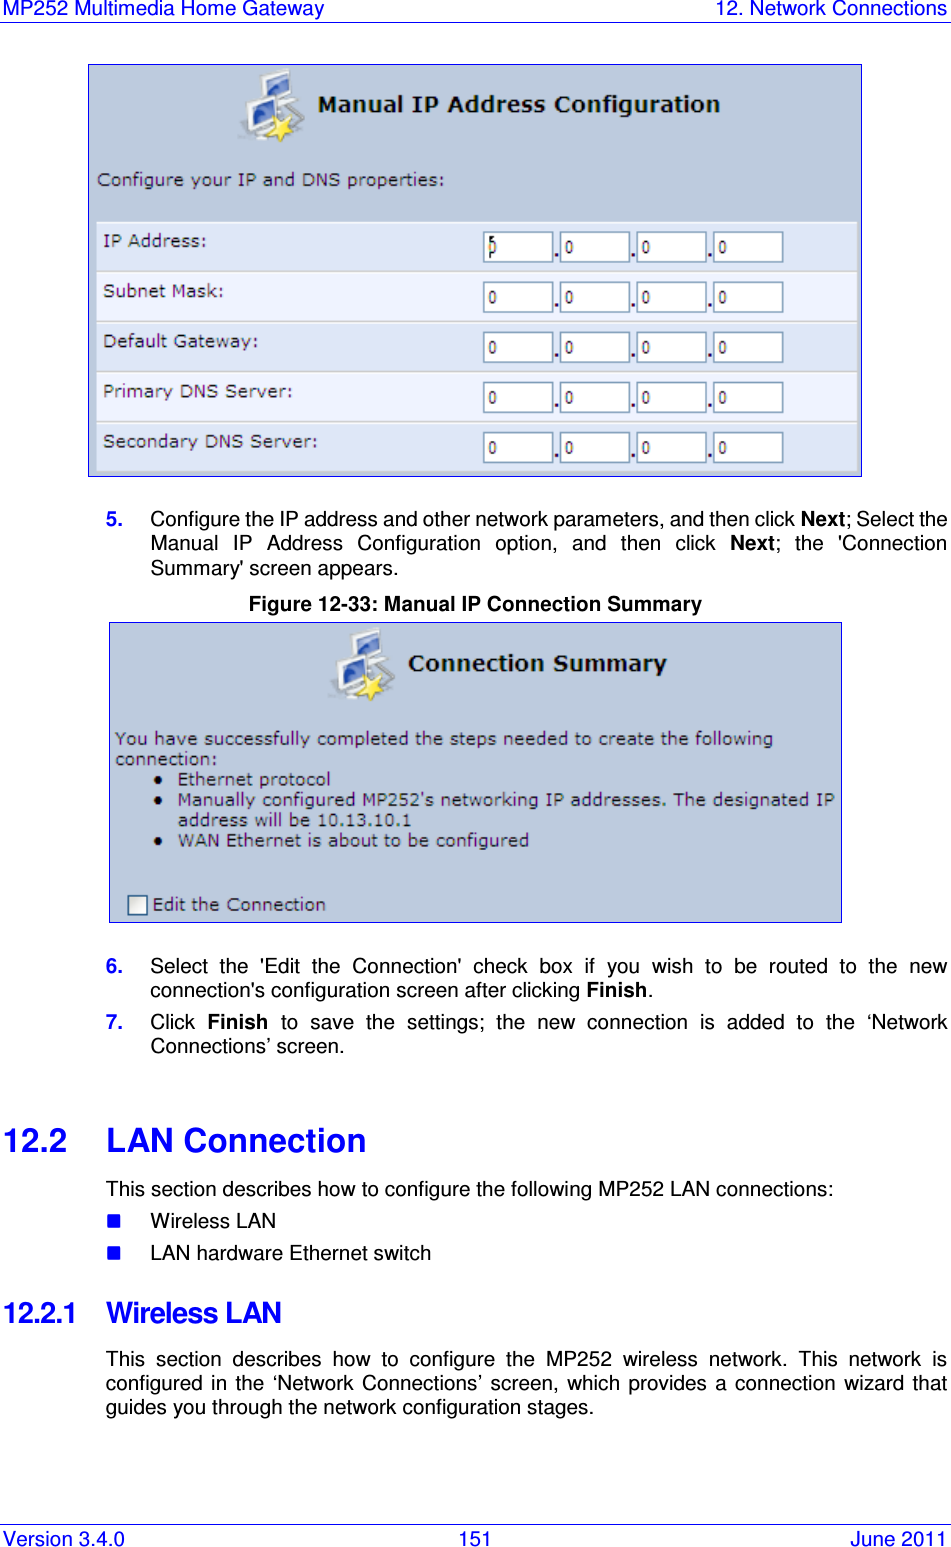 MP252 Multimedia Home Gateway  12. Network Connections Version 3.4.0  151  June 2011  5.  Configure the IP address and other network parameters, and then click Next; Select the Manual  IP  Address  Configuration  option,  and  then  click  Next;  the  &apos;Connection Summary&apos; screen appears. Figure 12-33: Manual IP Connection Summary  6.  Select  the  &apos;Edit  the  Connection&apos;  check  box  if  you  wish  to  be  routed  to  the  new connection&apos;s configuration screen after clicking Finish. 7.  Click  Finish  to  save  the  settings;  the  new  connection  is  added  to  the  ‘Network Connections’ screen.  12.2  LAN Connection This section describes how to configure the following MP252 LAN connections:  Wireless LAN   LAN hardware Ethernet switch 12.2.1  Wireless LAN This  section  describes  how  to  configure  the  MP252  wireless  network.  This  network  is configured  in  the  ‘Network  Connections’ screen,  which  provides  a  connection  wizard that guides you through the network configuration stages.  